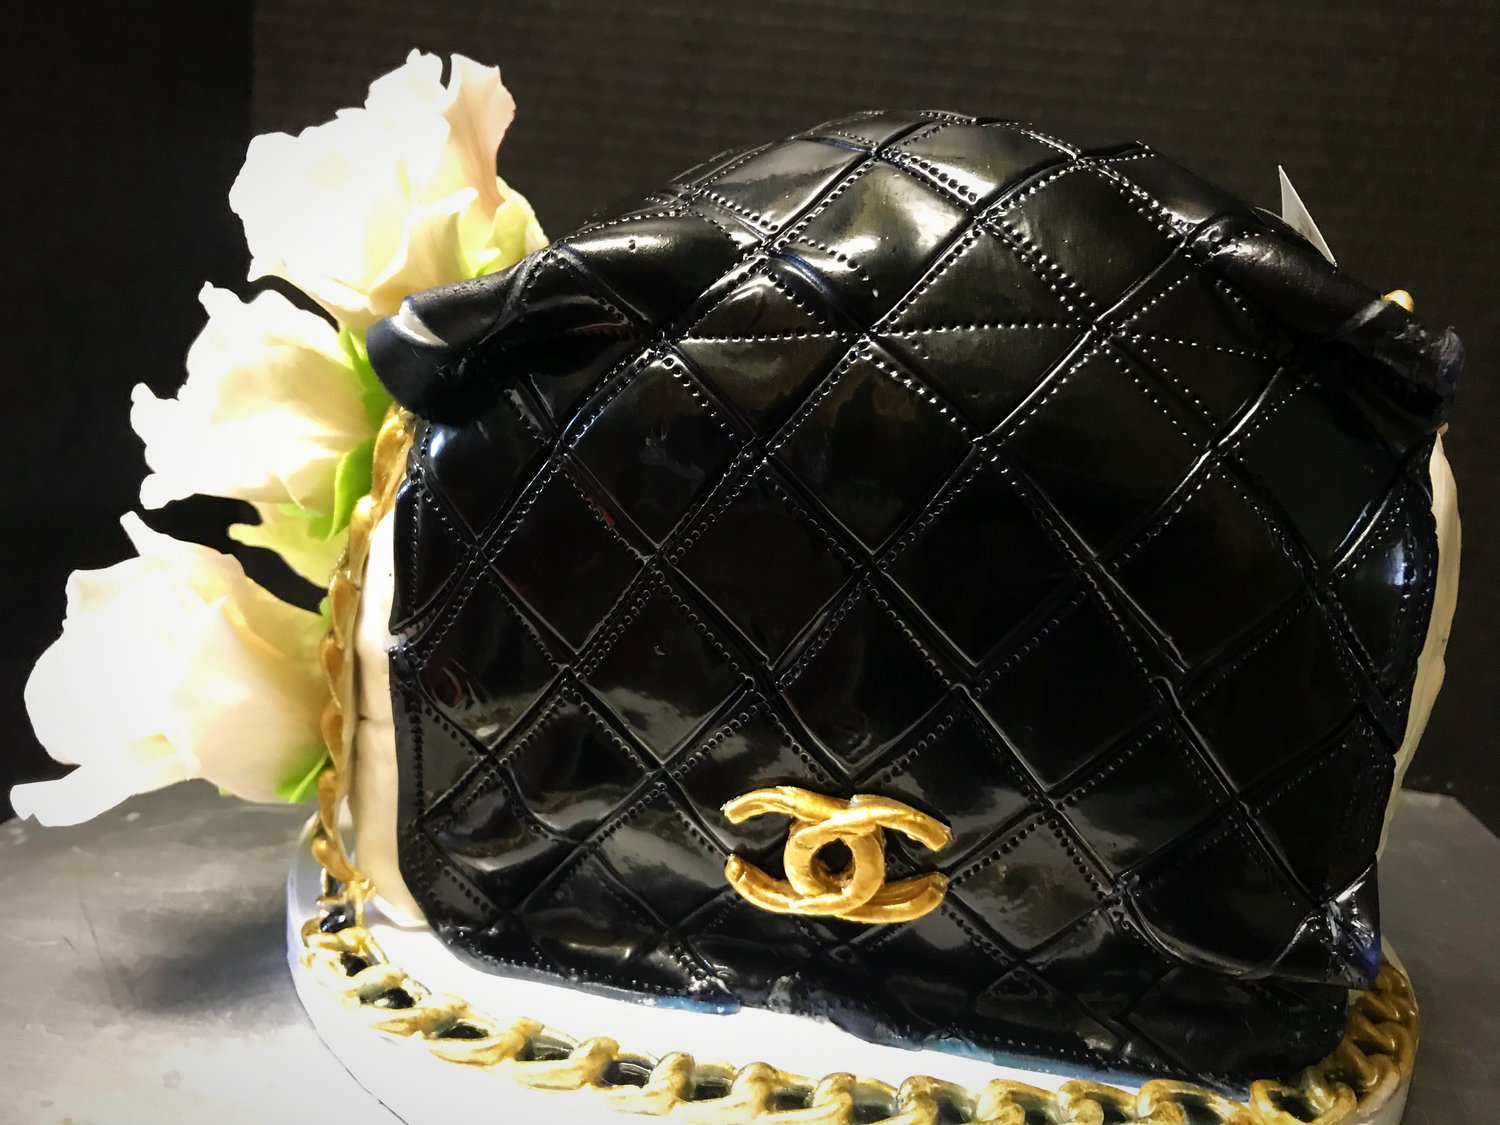 chanel gifts bags